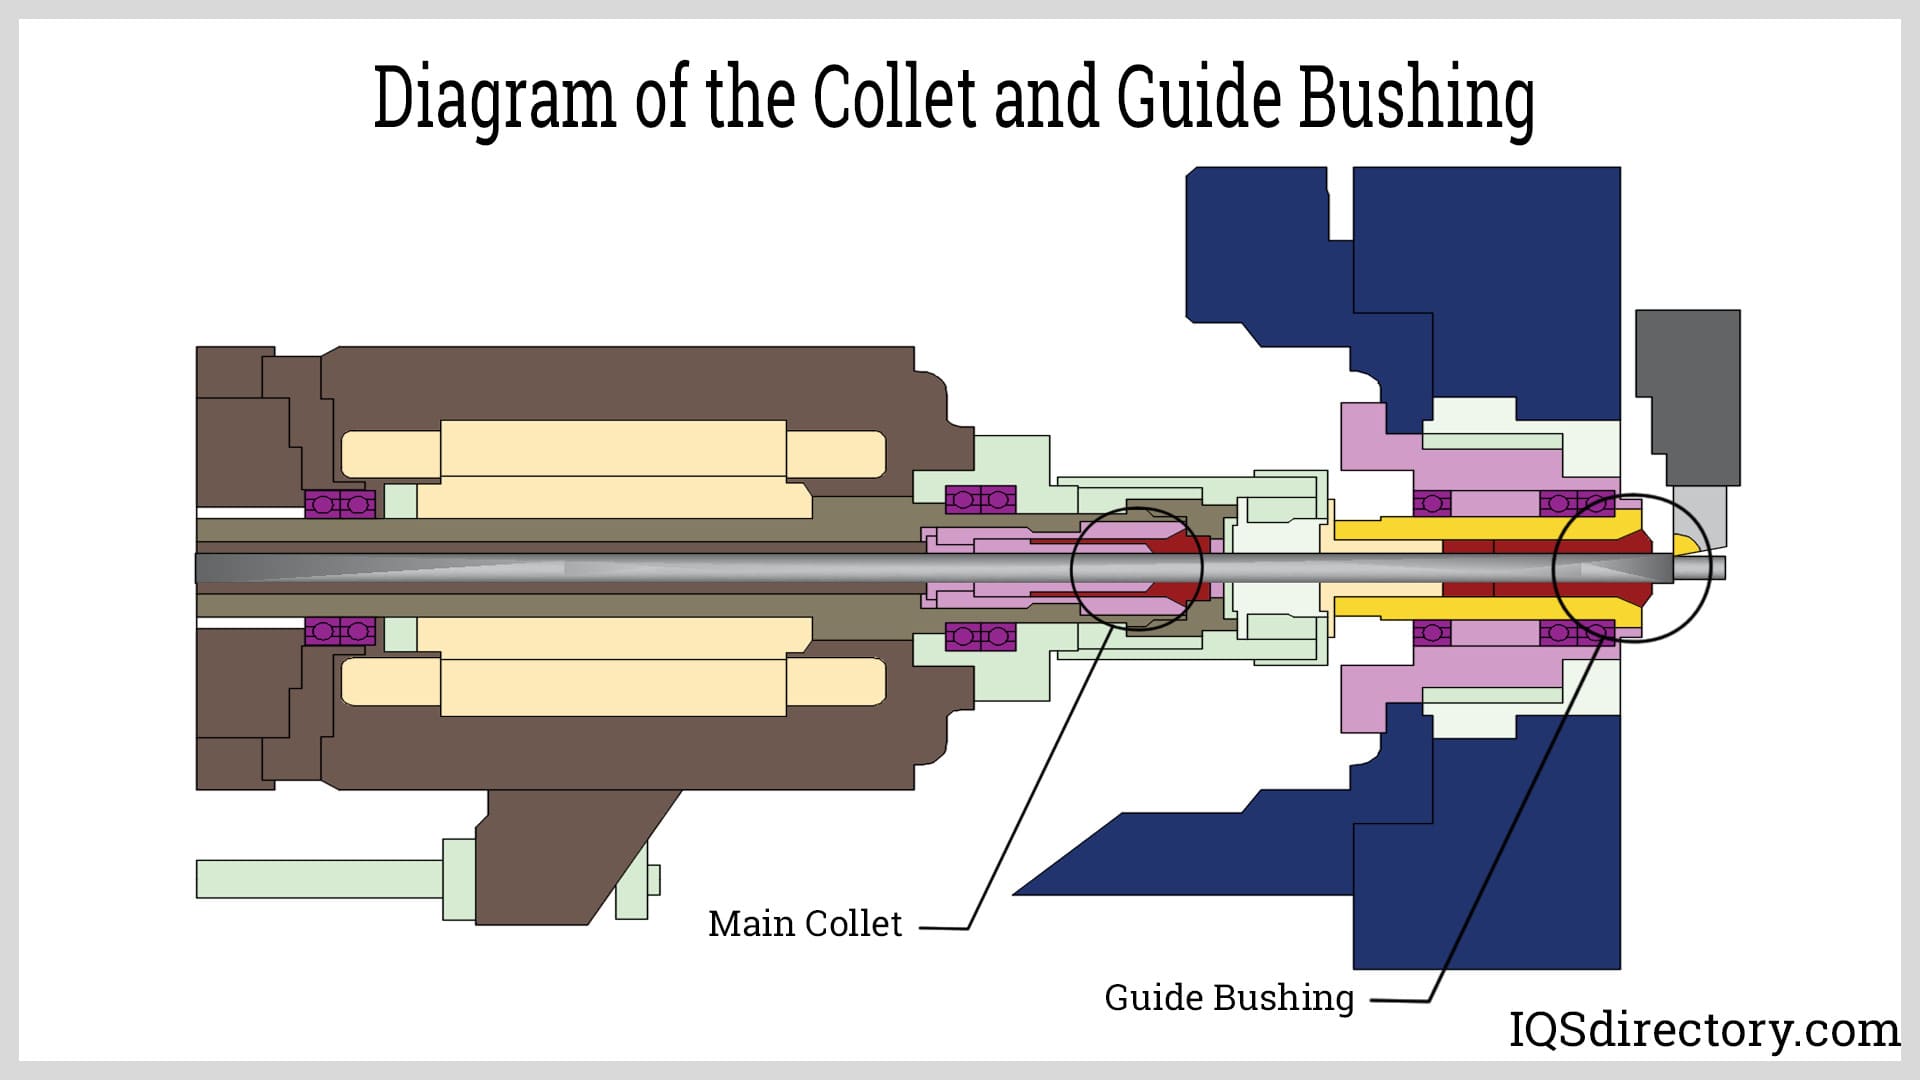 Diagram of the Collet and Guide Bushing